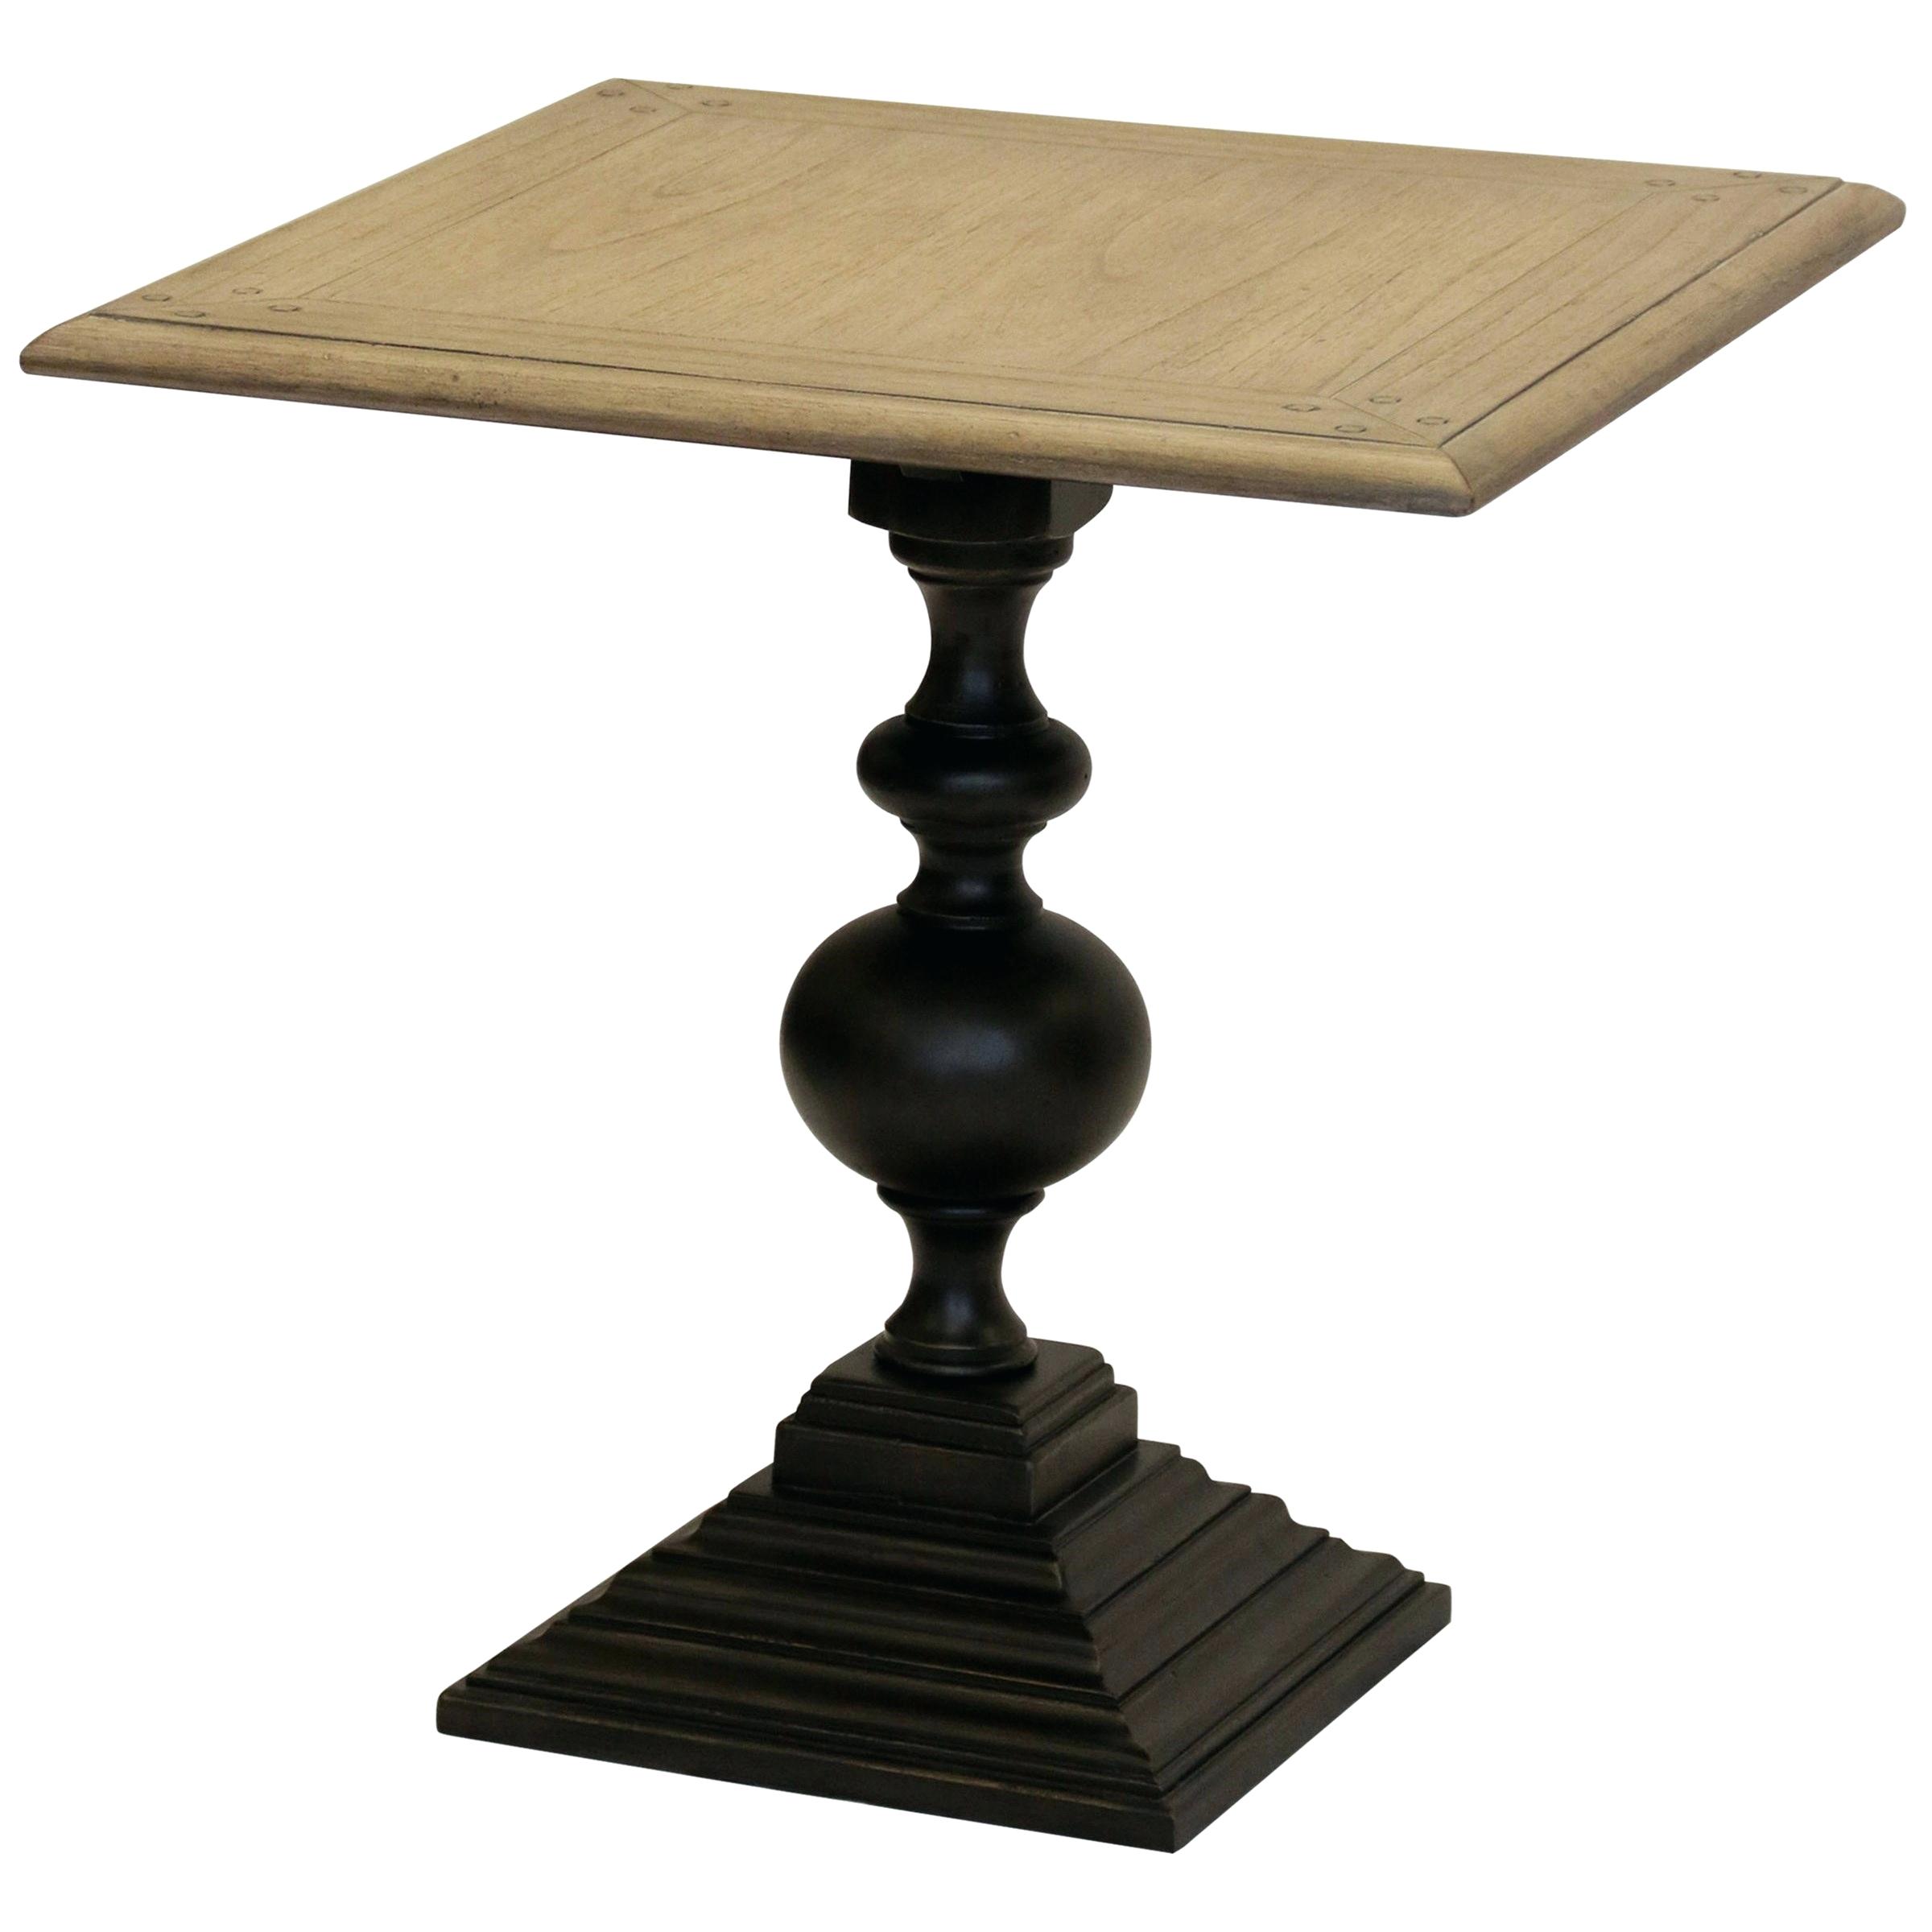 pedestal end table base rokosinan info occasional tables square accent with black dining room rectangle pier one anywhere edison bulb lamp small target threshold drawer pottery